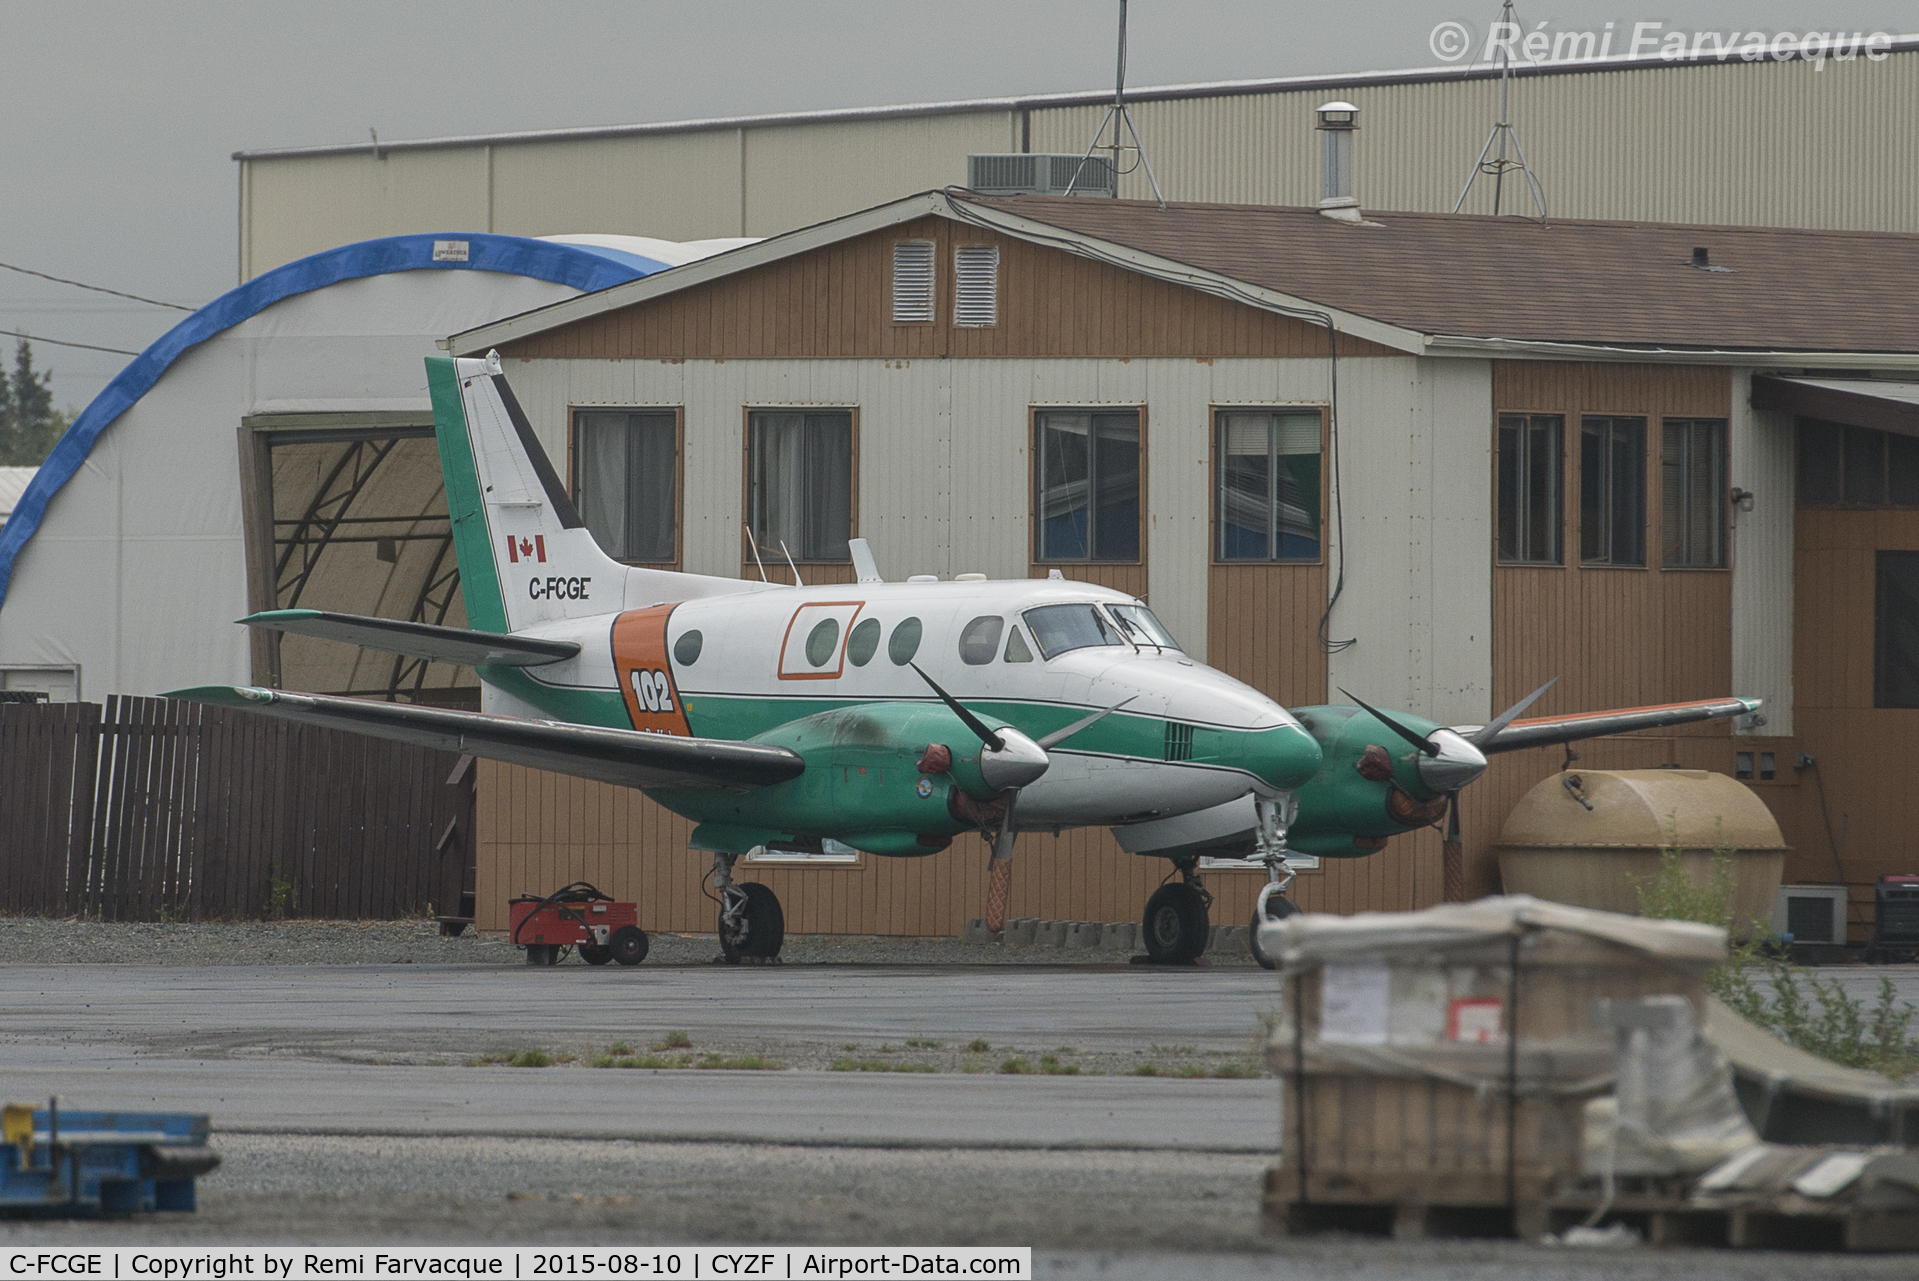 C-FCGE, 1966 Beech A90 King Air C/N LJ-118, New livery since posted here. Nicely parked, ready to go..